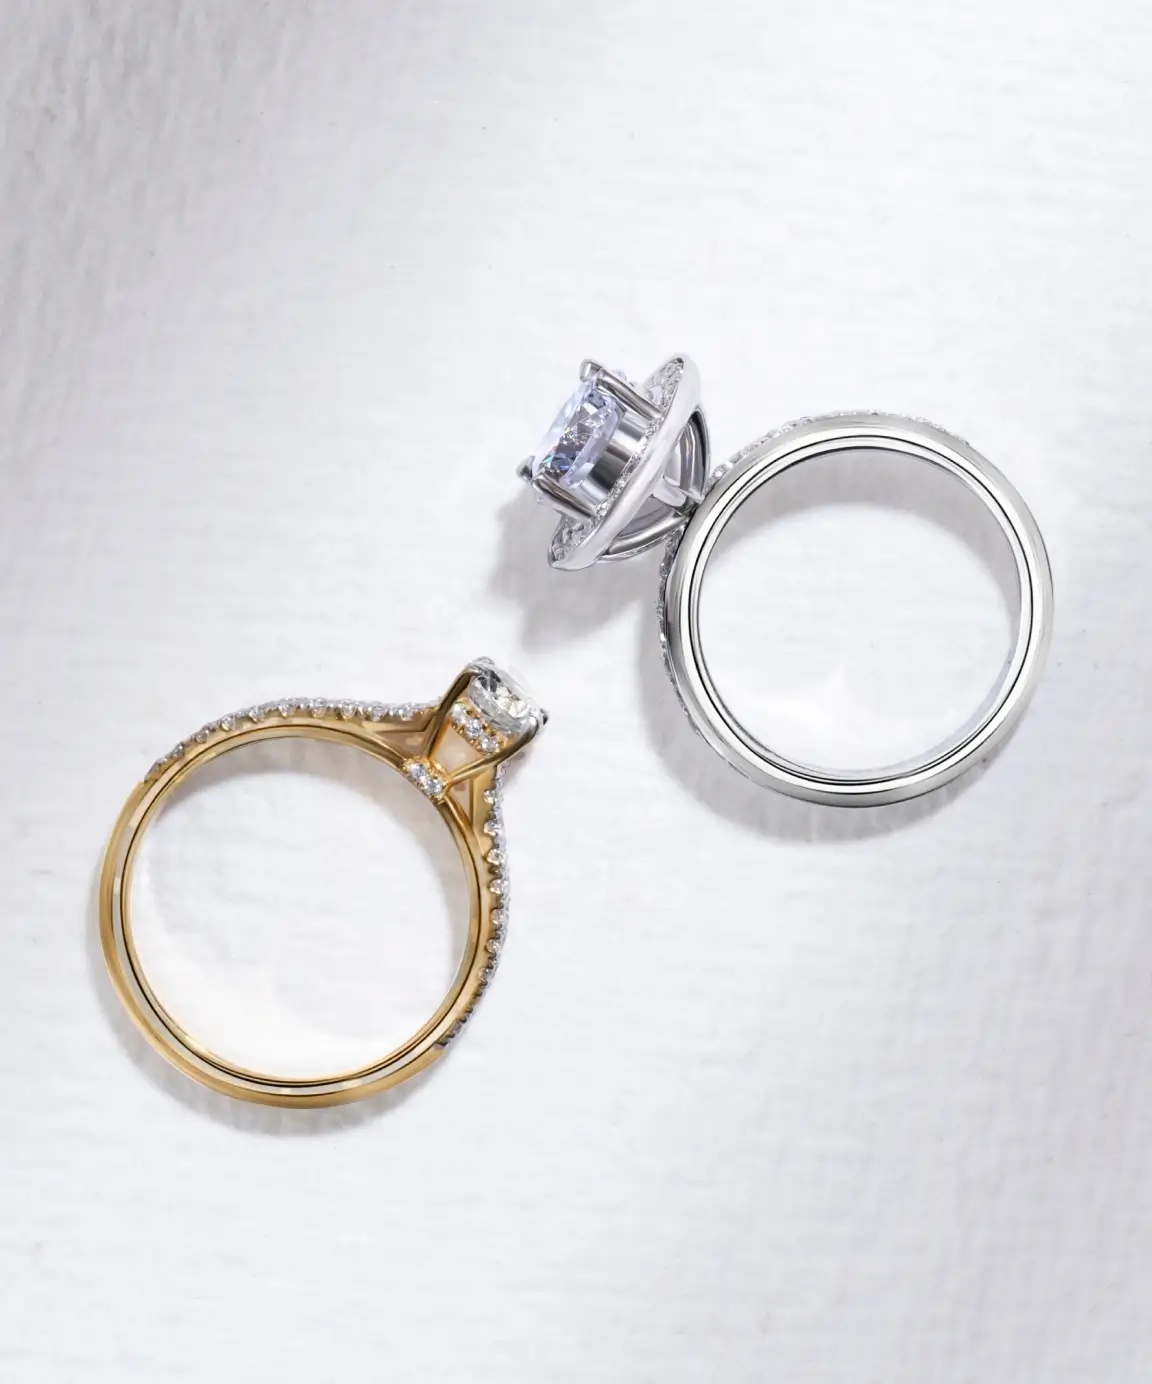 Platinum Vs. Gold: Which Is Better Platinum Jewelry Or Gold?